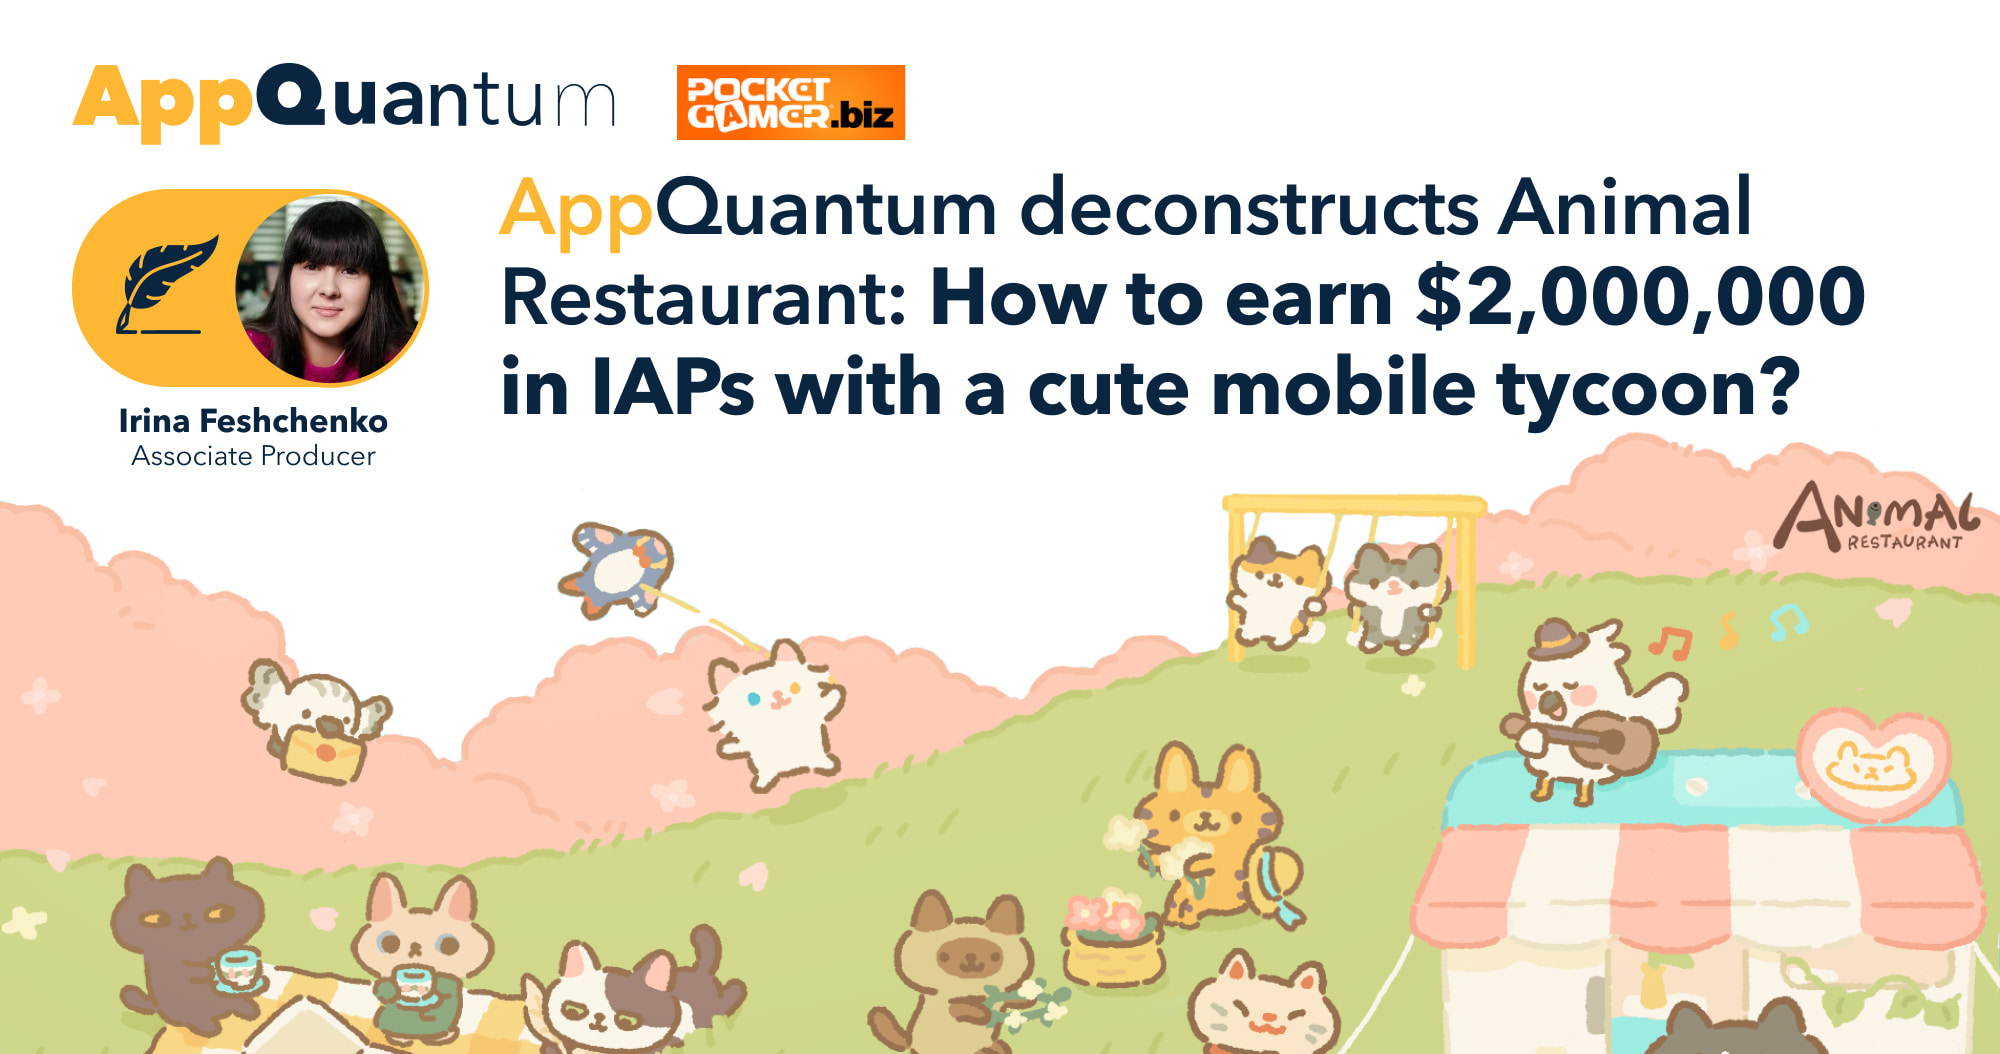 AppQuantum Deconstructs Animal Restaurant: How to Earn $2,000,000 in IAPs with a Cute Mobile Tycoon?